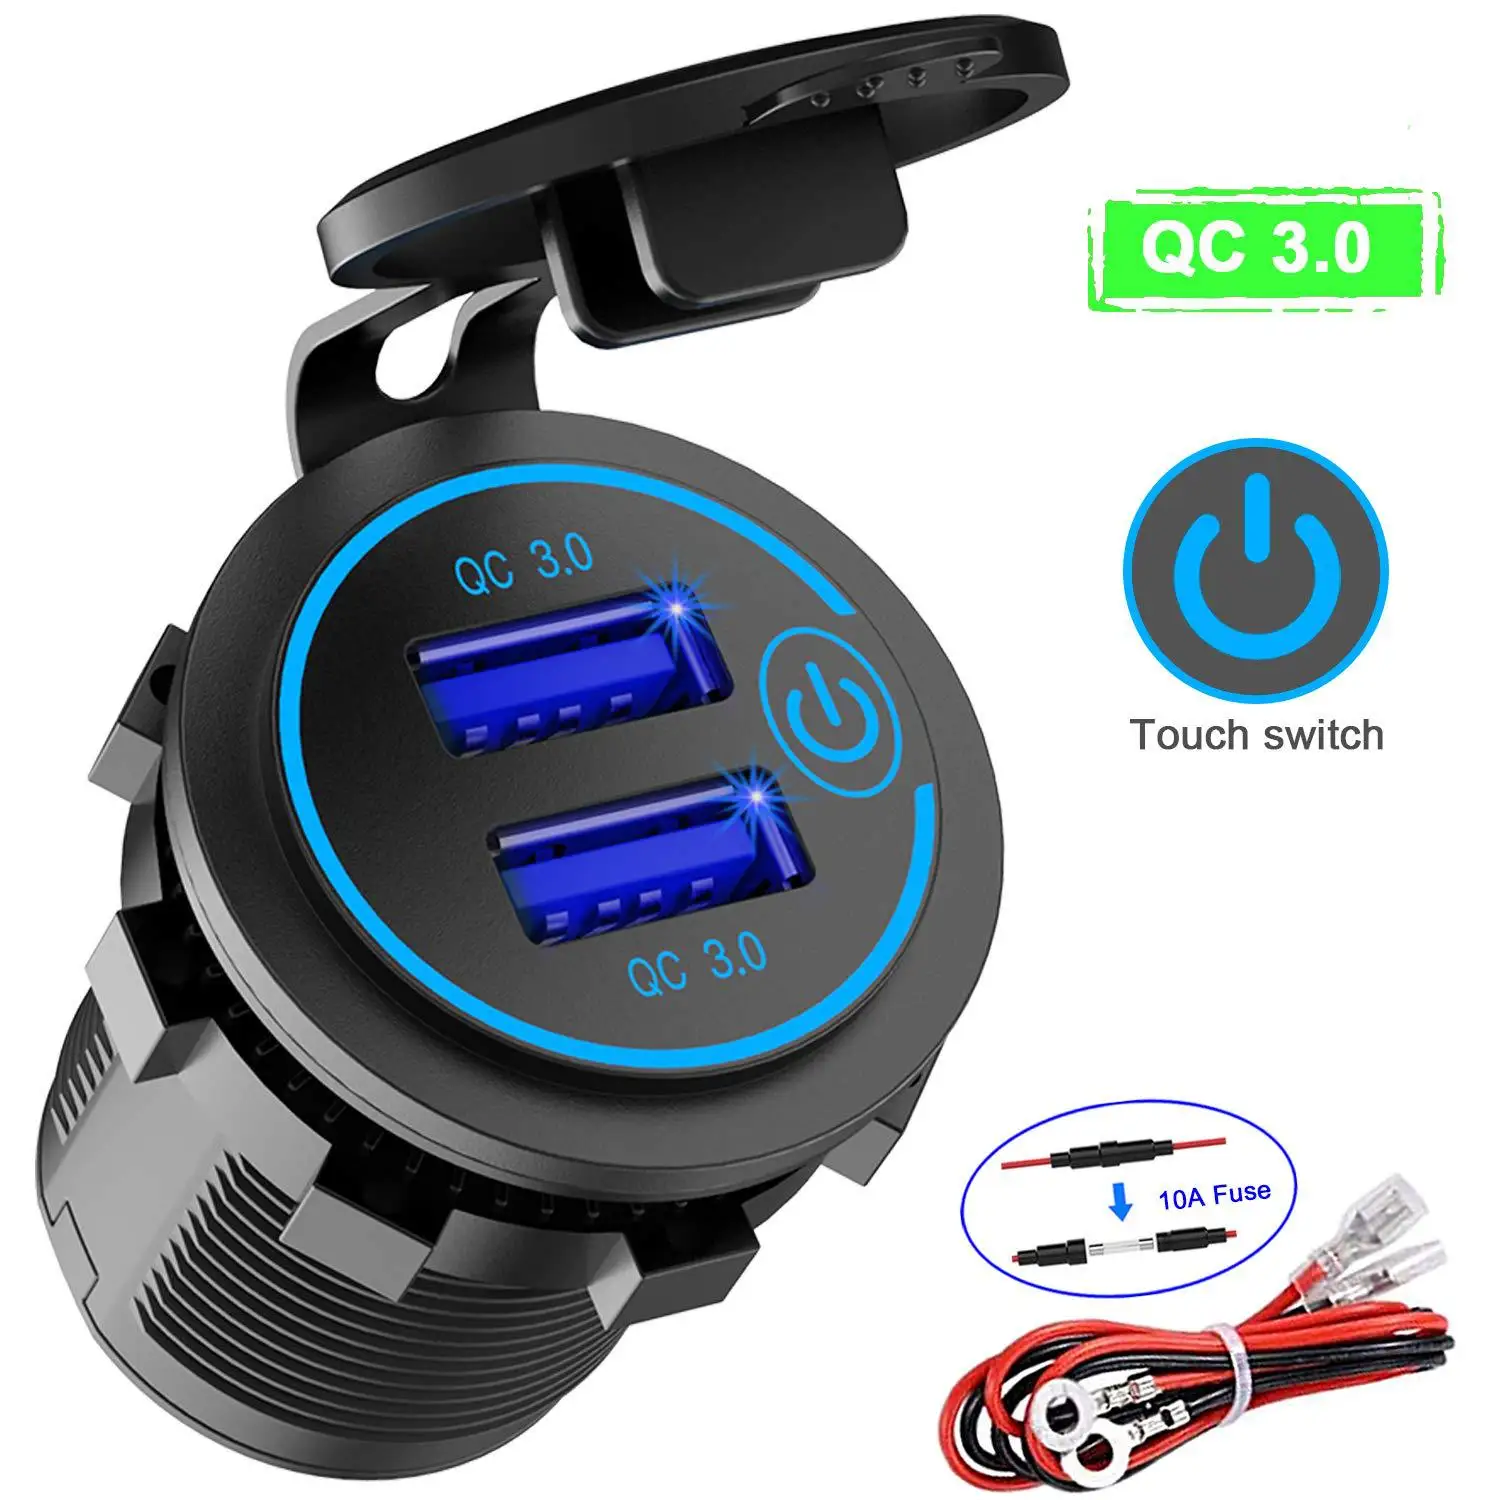 

36W QC 3.0 Touch Switch Waterproof Universal Motorcycle Car Truck Boat Dual USB Charger Socket For Phone Tablet Camera GPS DVR